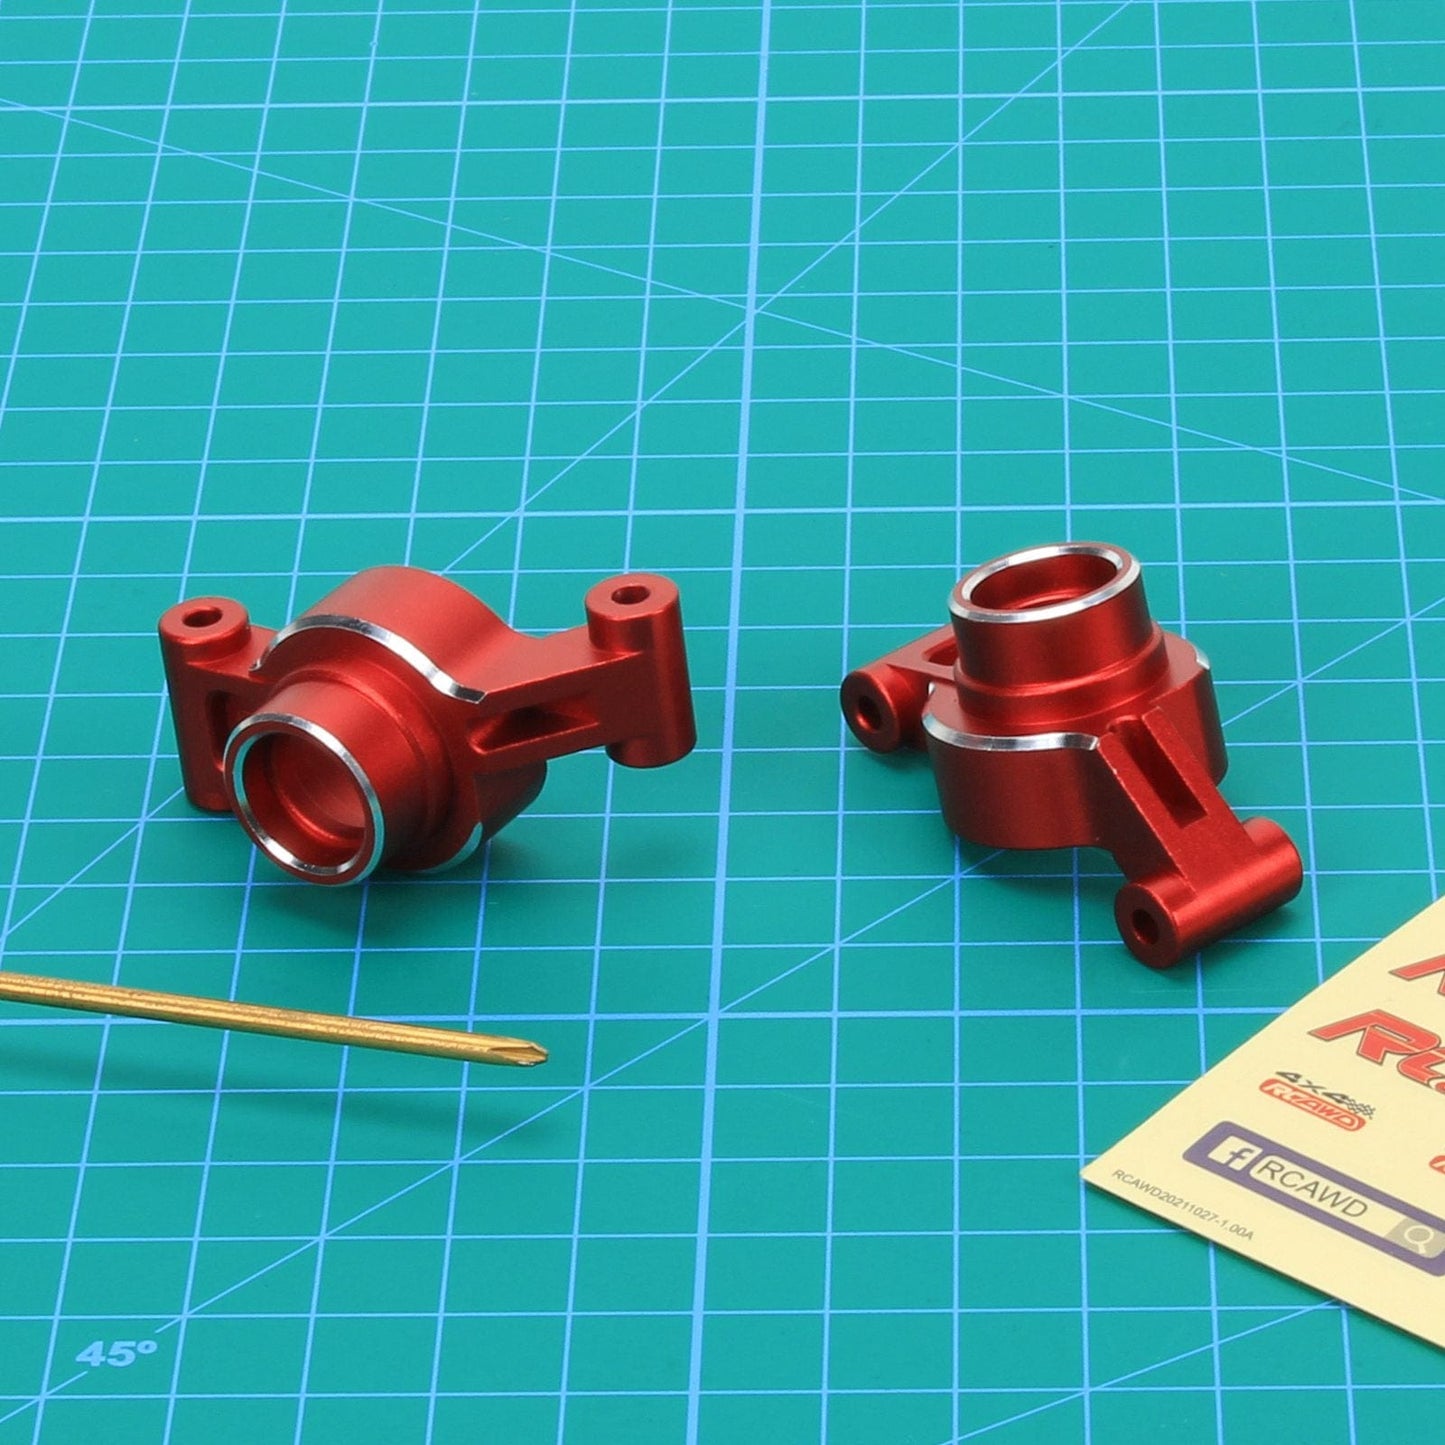 RCAWD TRAXXAS MAXX Red RCAWD Traxxas 2pcs Carriers Stub Axle for Maxx upgrades